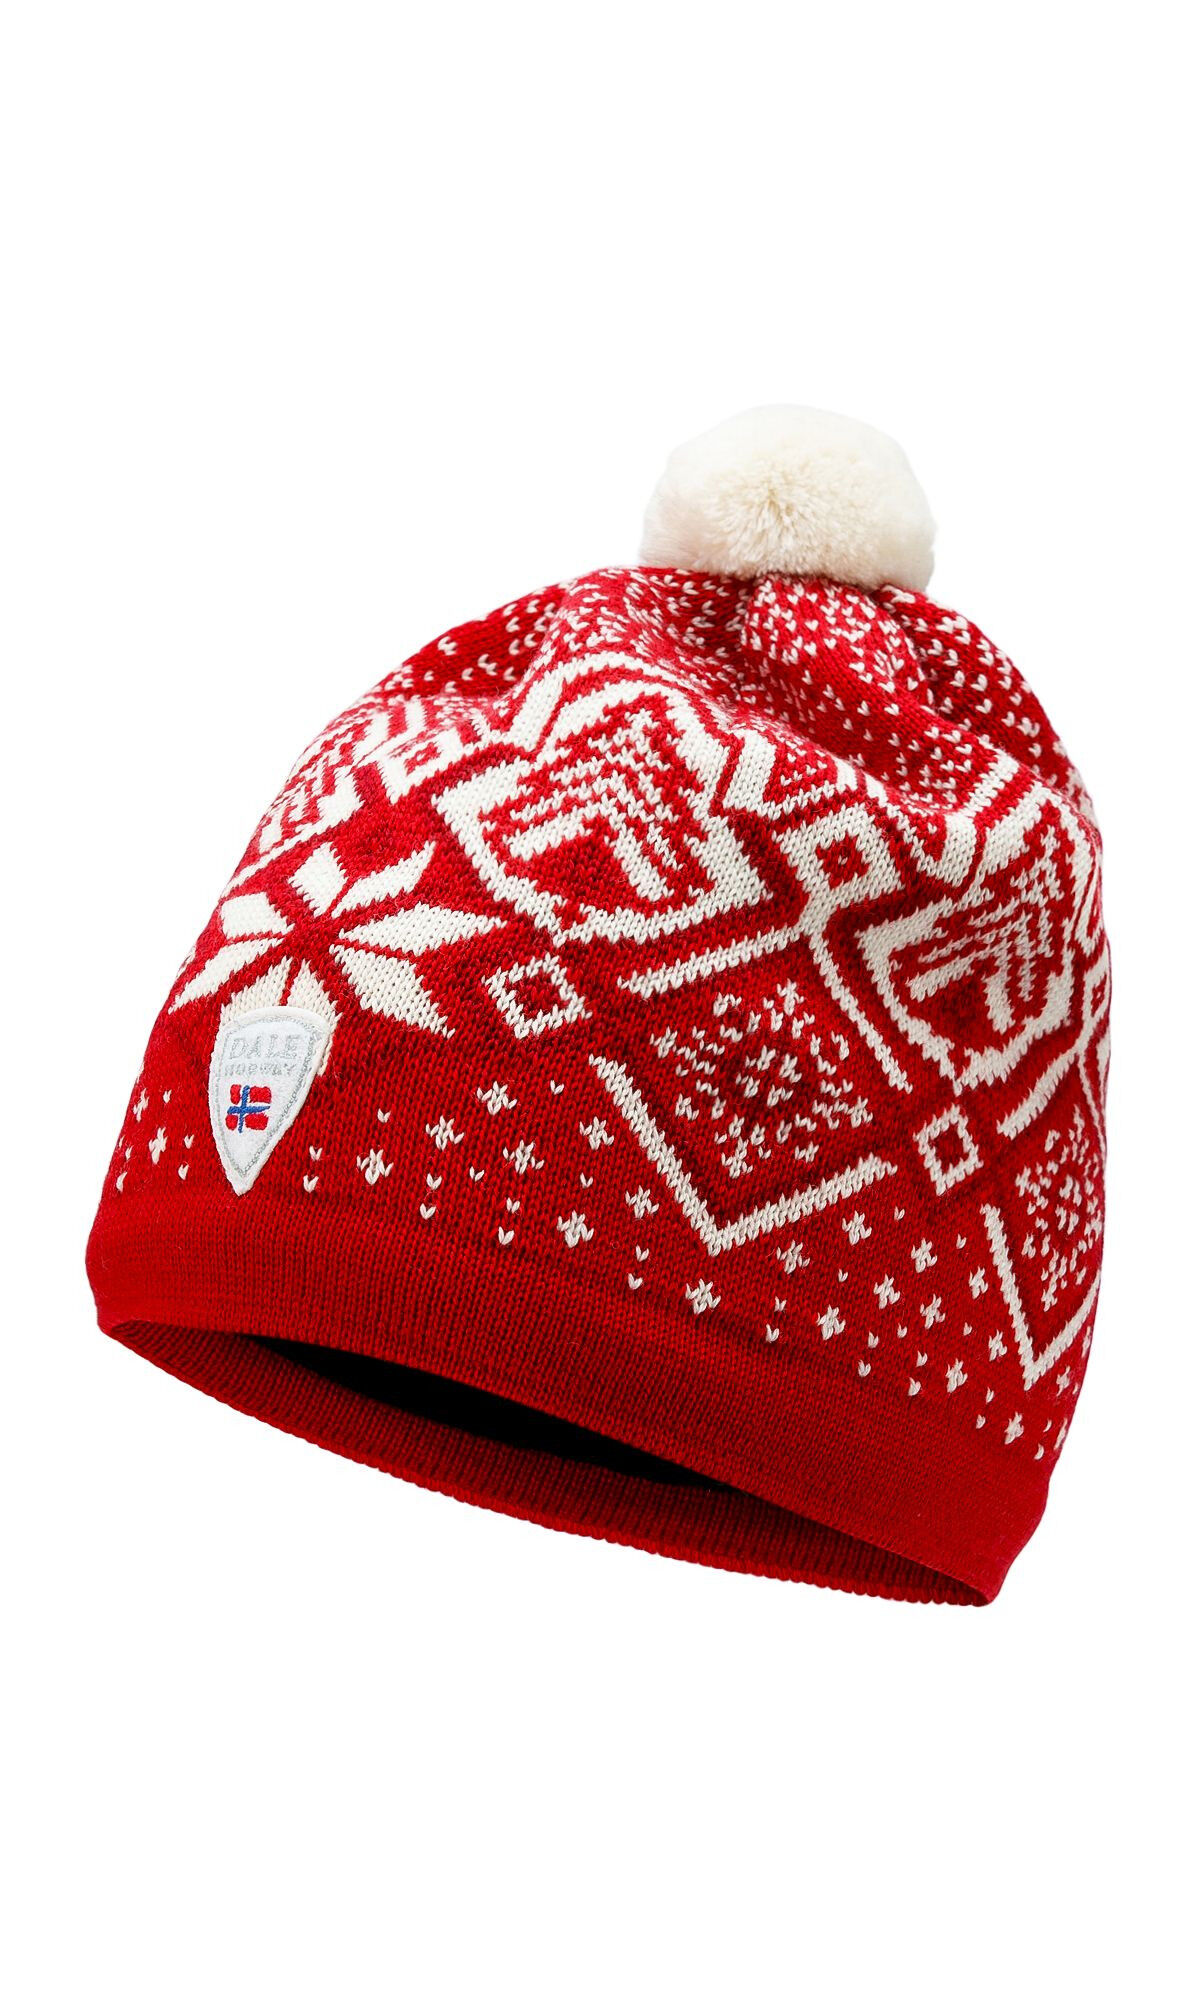 Dale of Norway Winterland Hat - Pipo